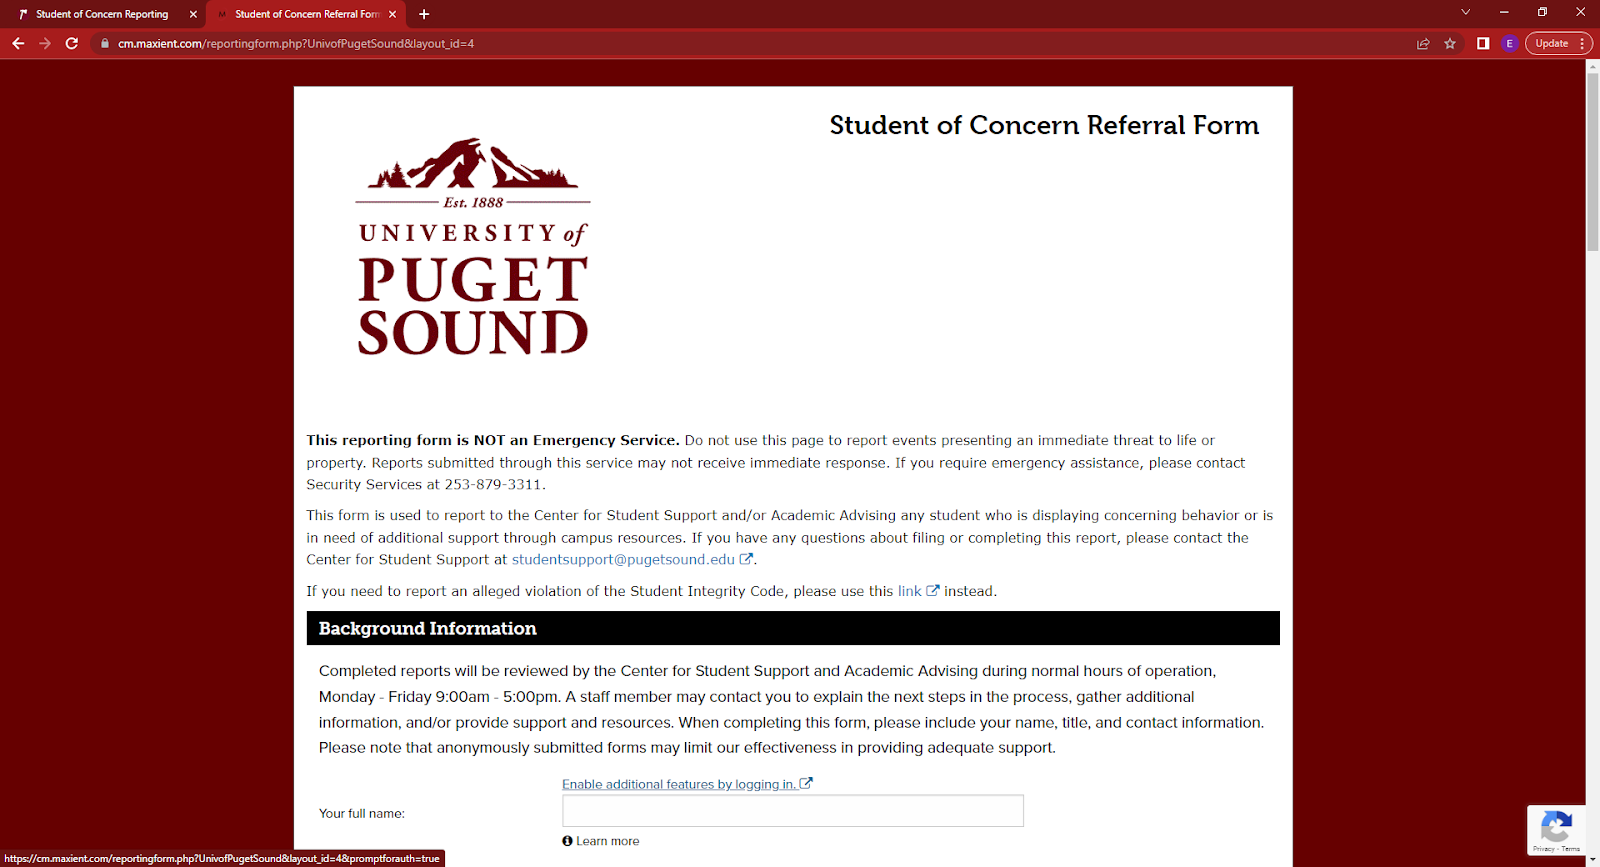 Student of Concern Referral Form screen capture